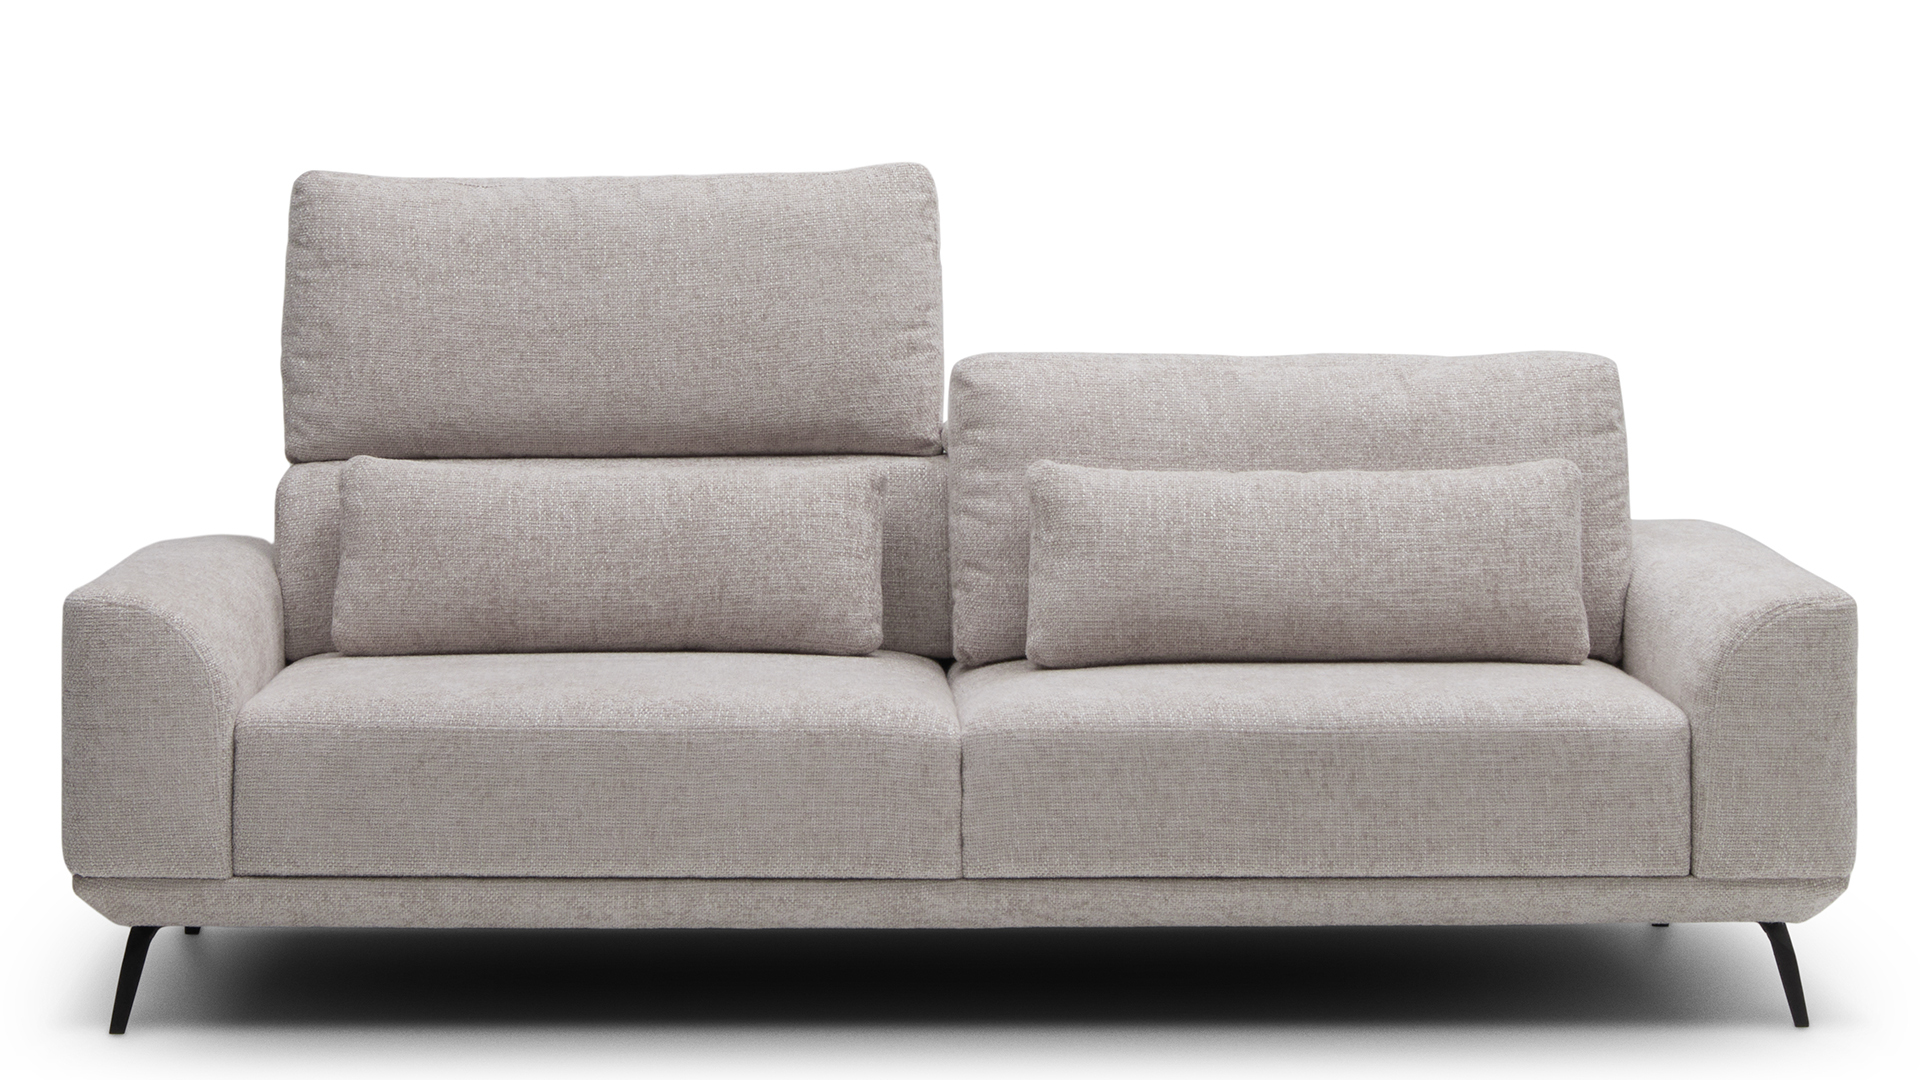 Sofa with seat extension function Misty